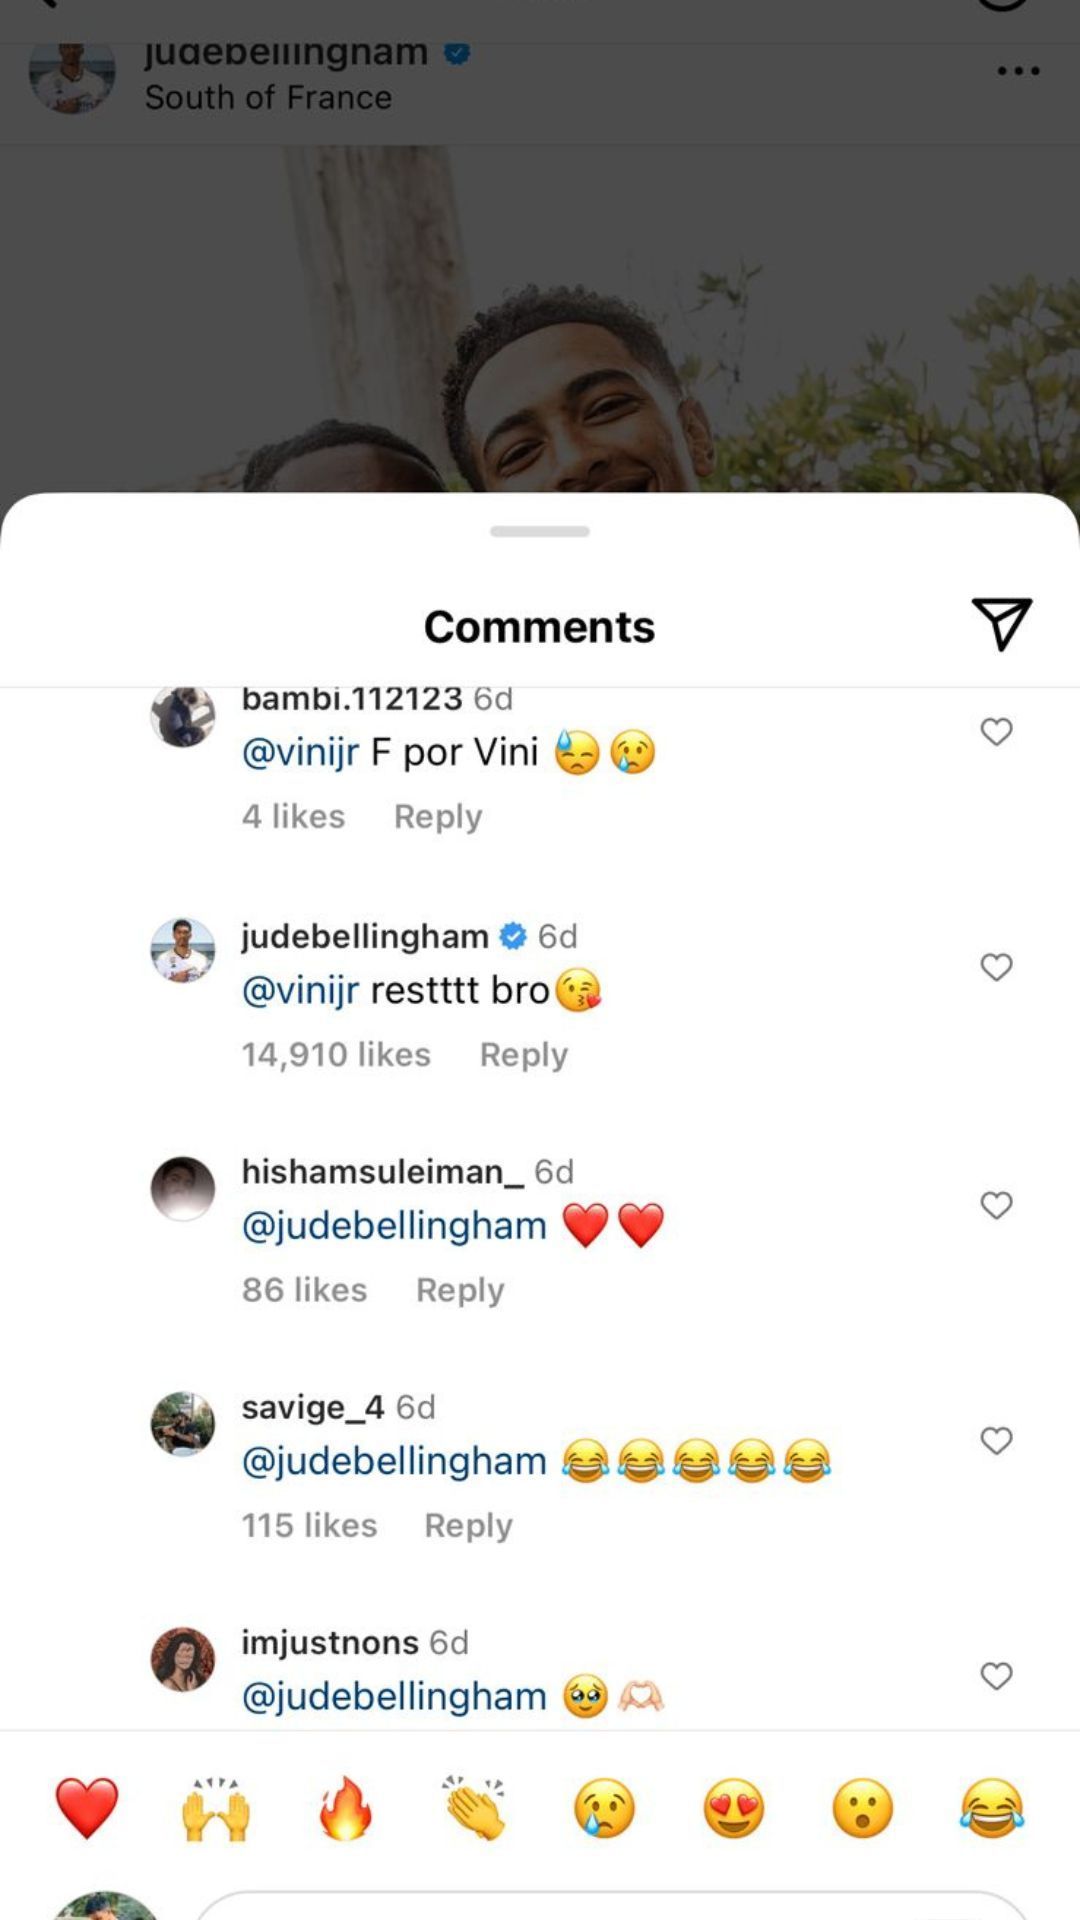 The social media exchange between the two Real Madrid players